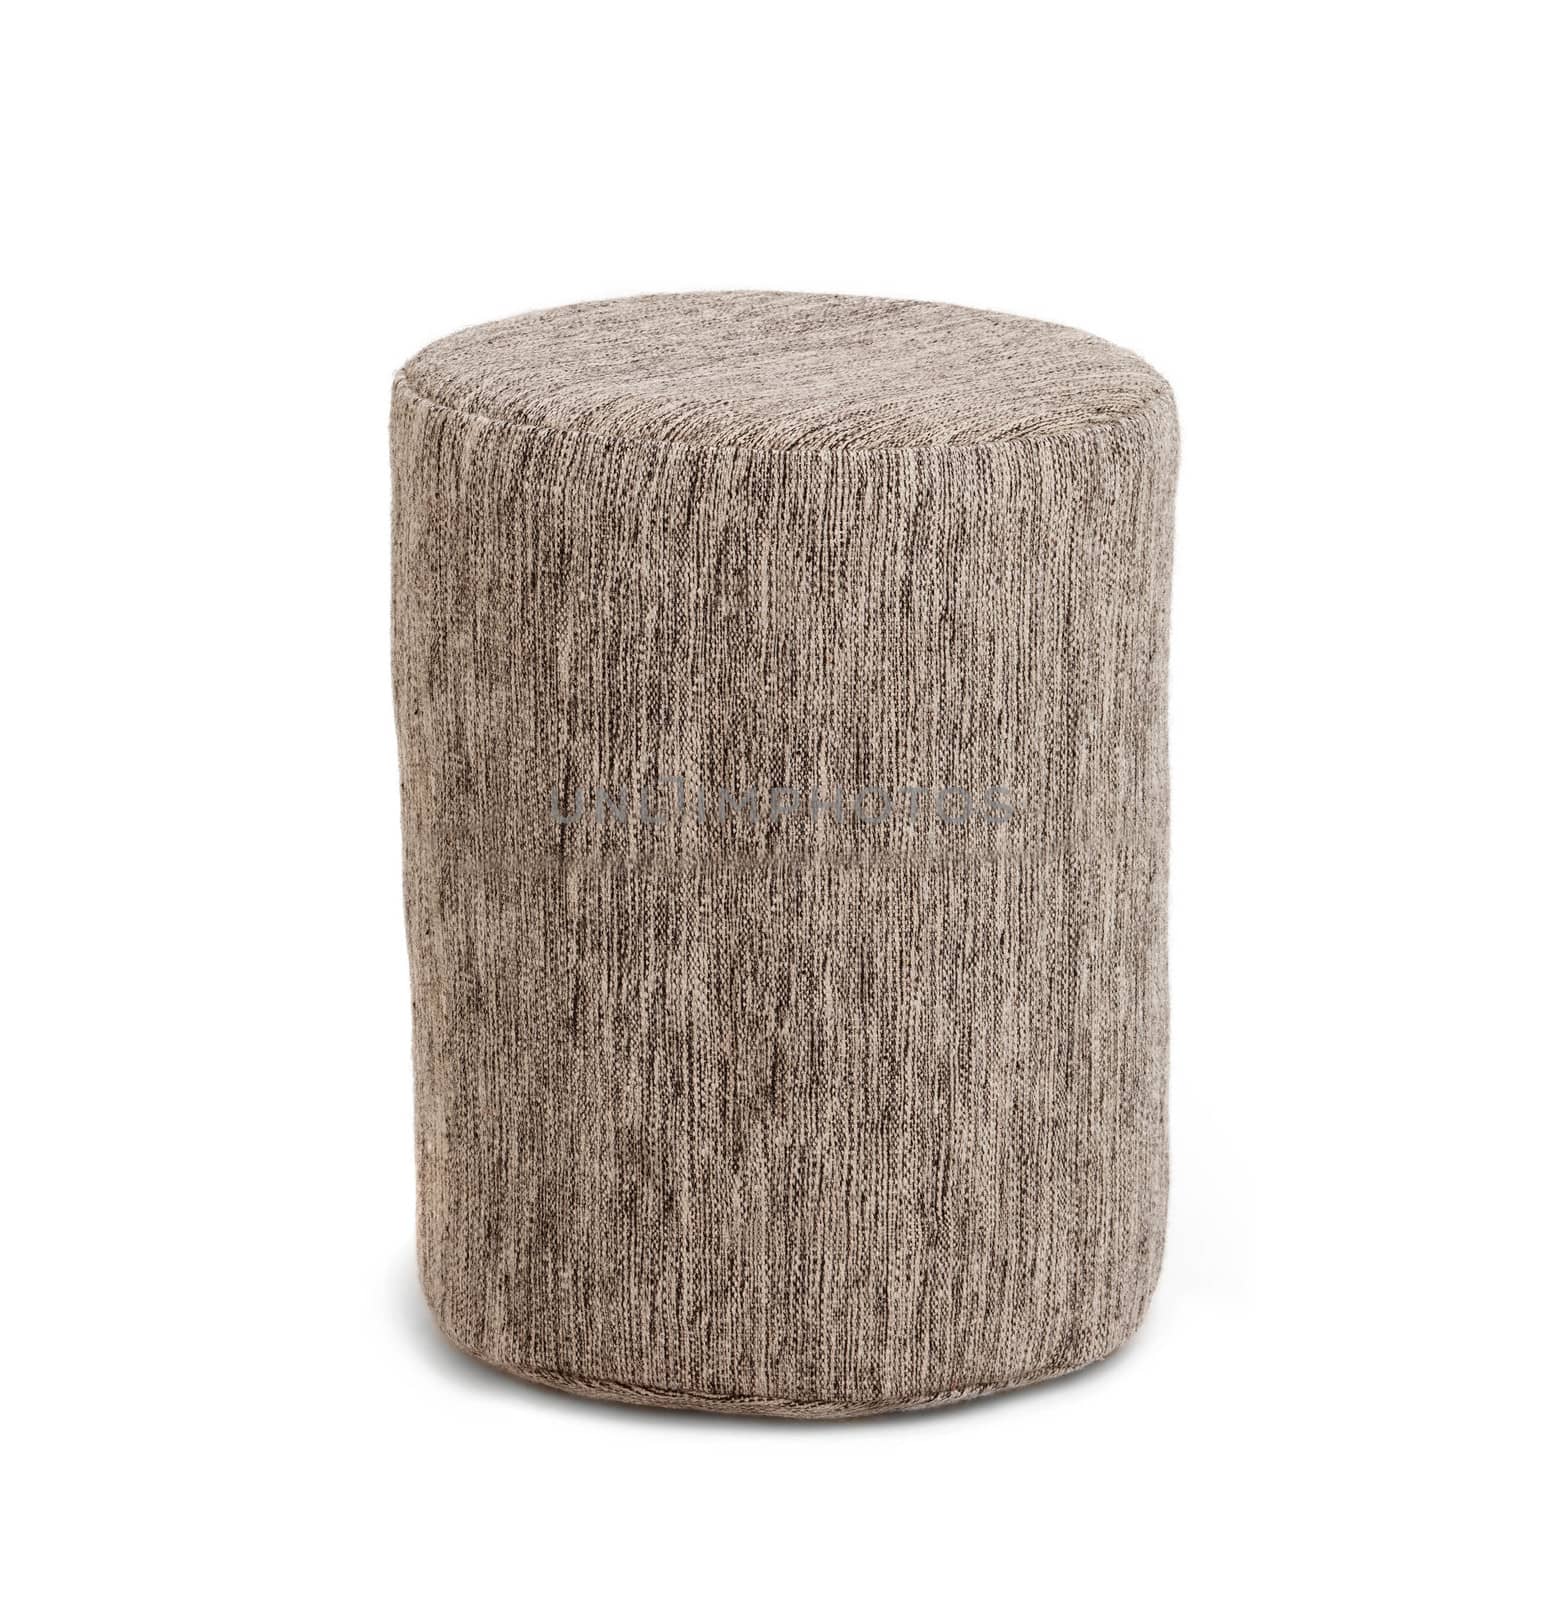 chair in form of tree stump